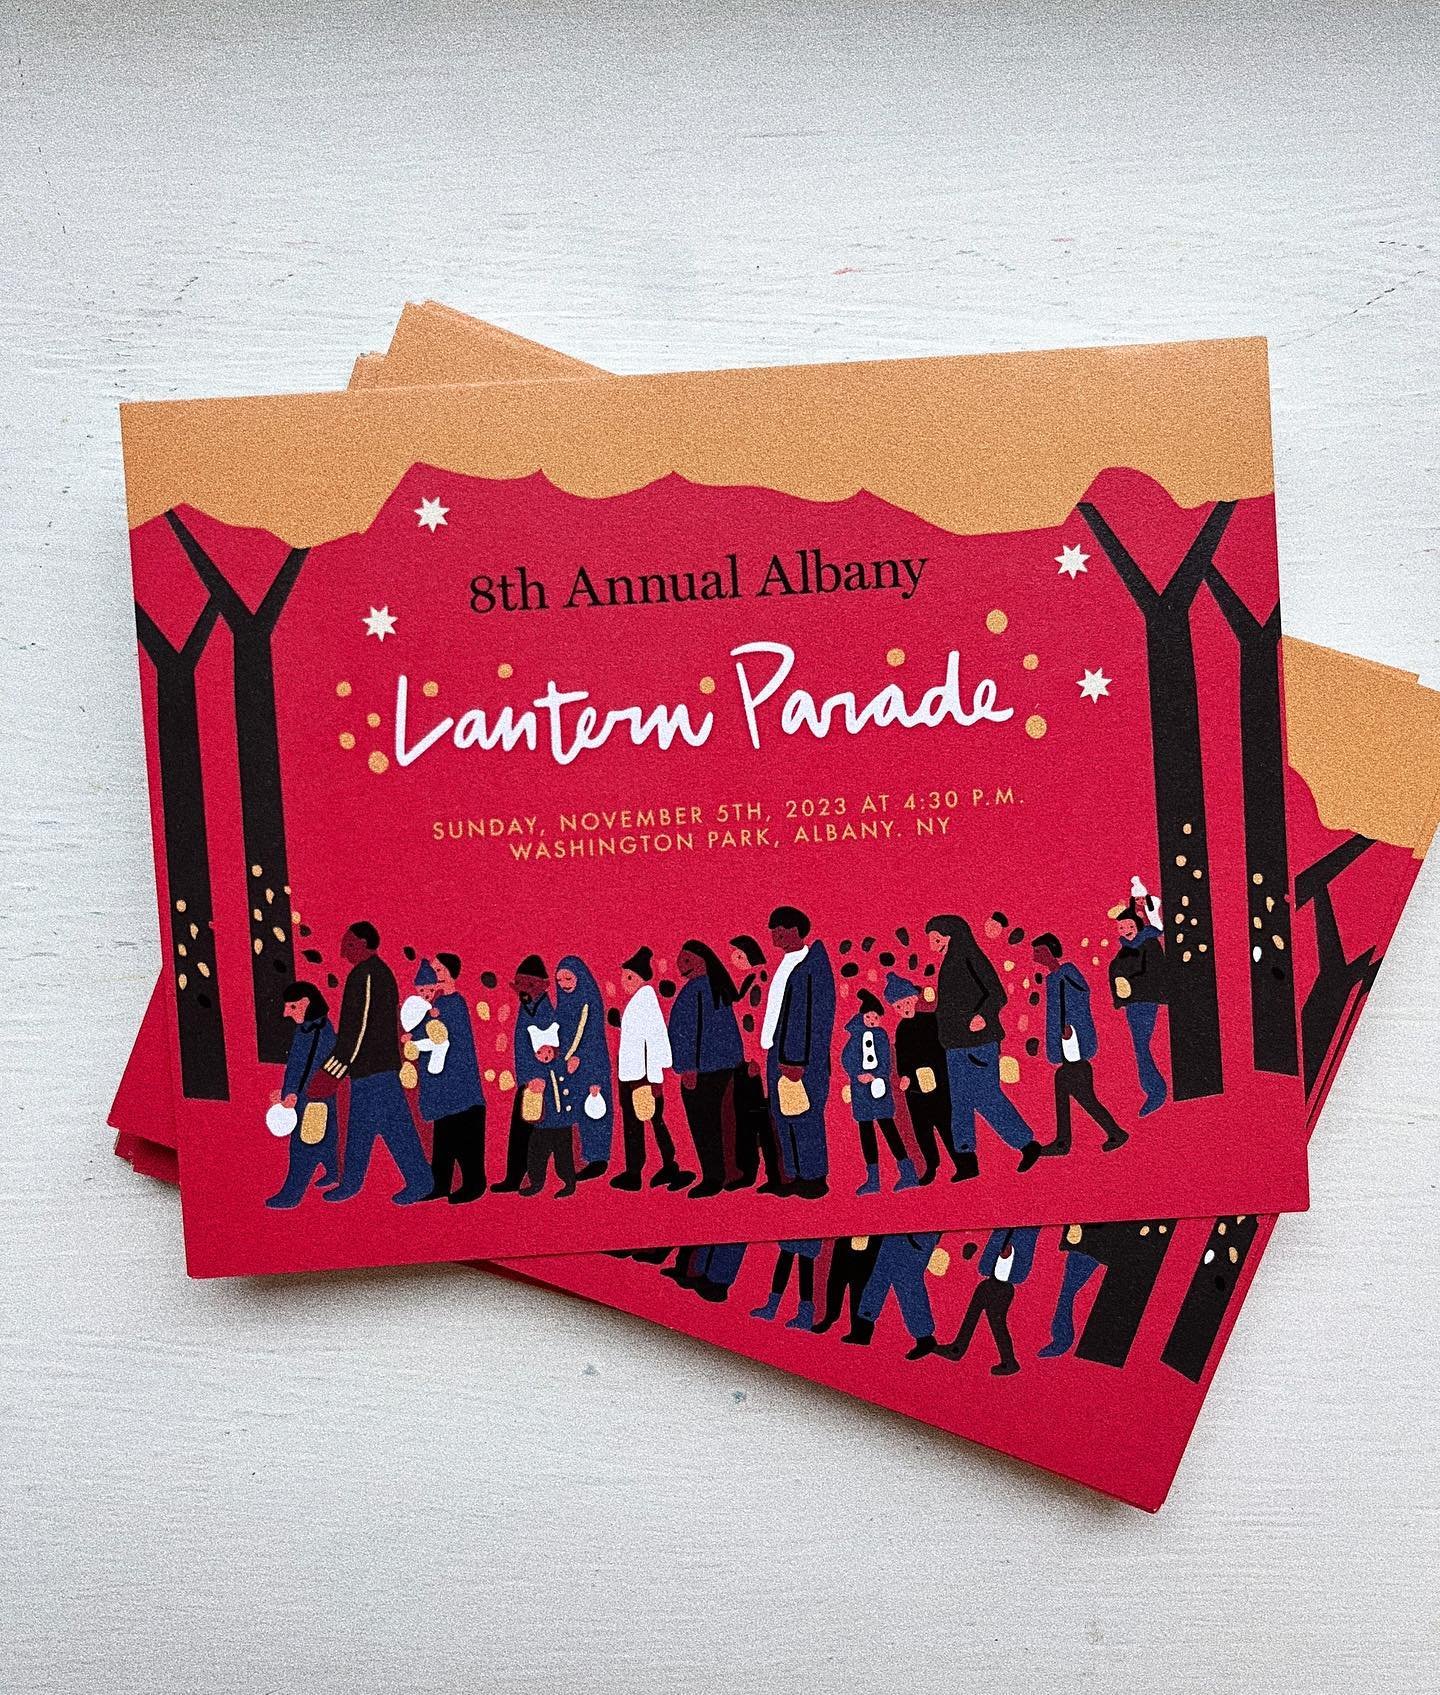 Lucky to make the postcards for my favorite event in my city every year - thank you @saread, our amazing friend who pulls this together every year with @washingtonparkconservancy! See you Sunday at the #albanylanternparade